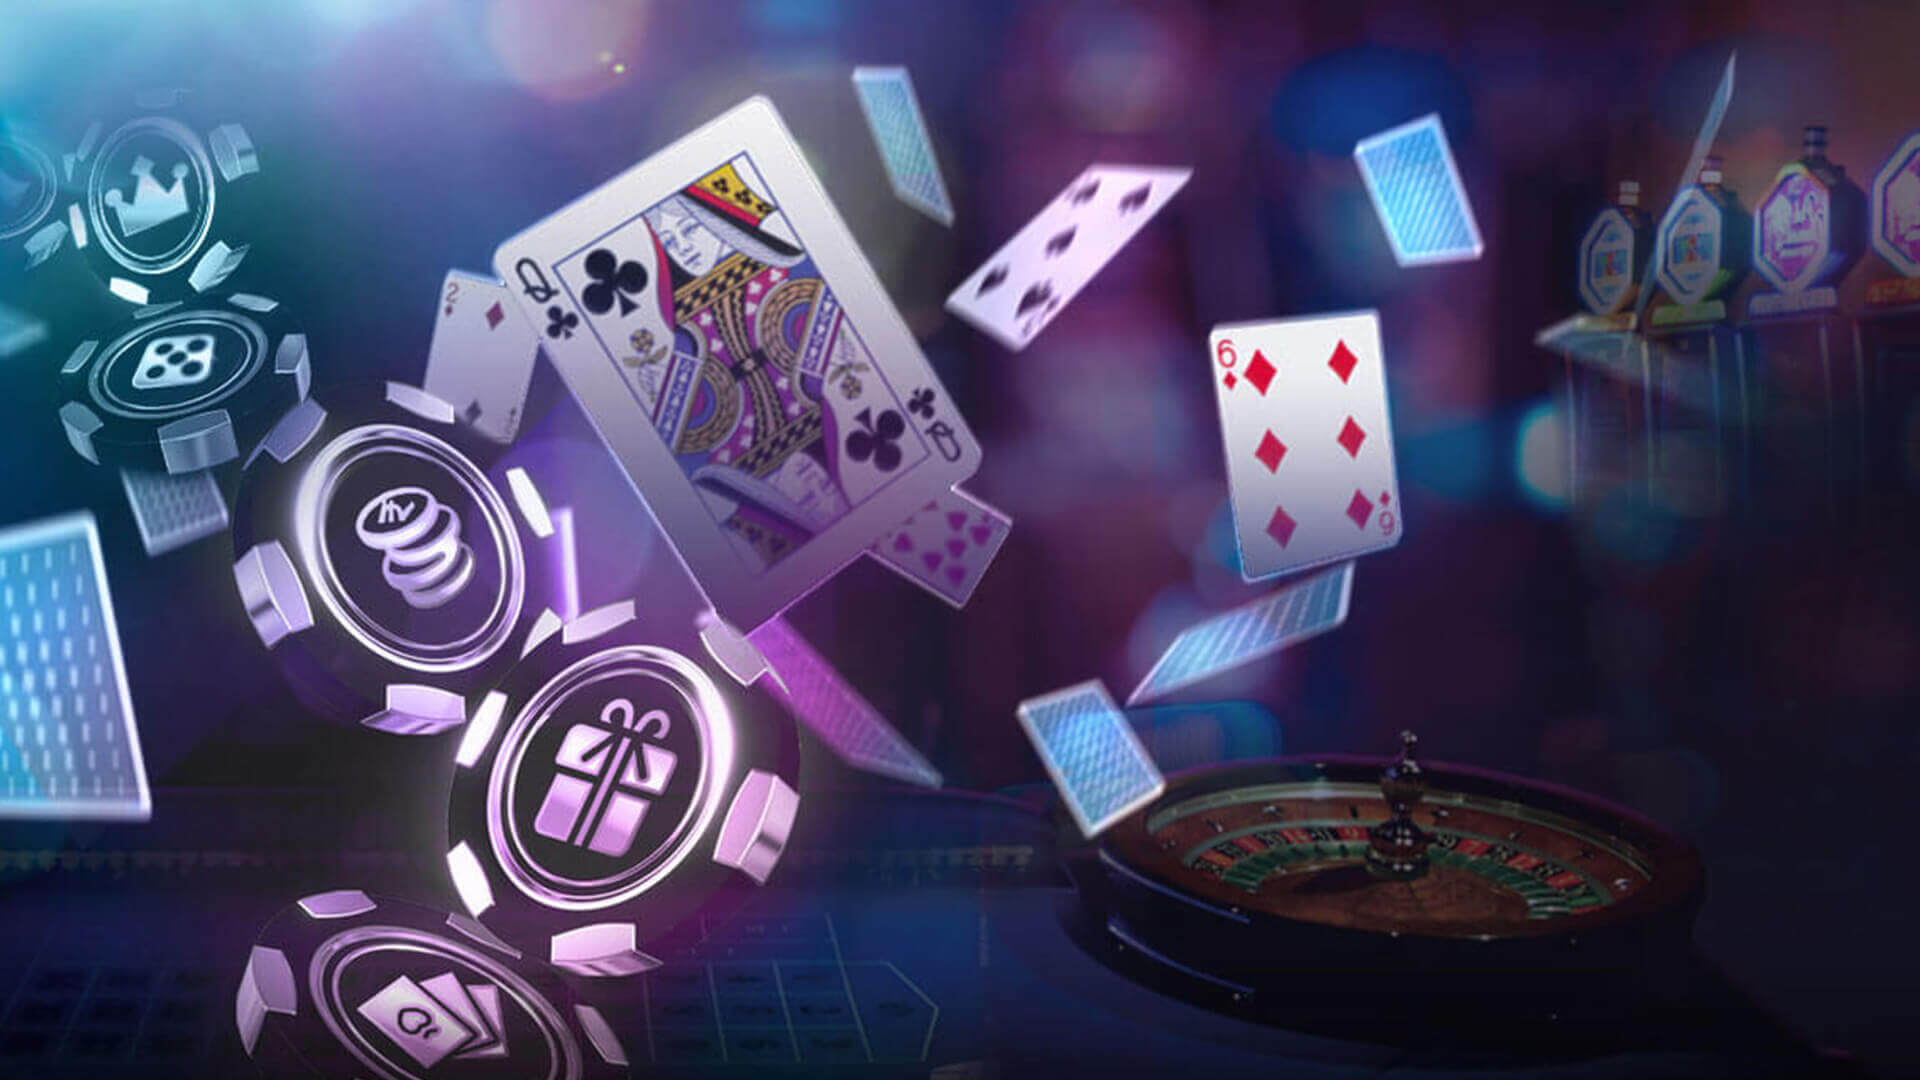 Mastering The Way Of ONLINE SLOT Is Not An Accident - It's An Art